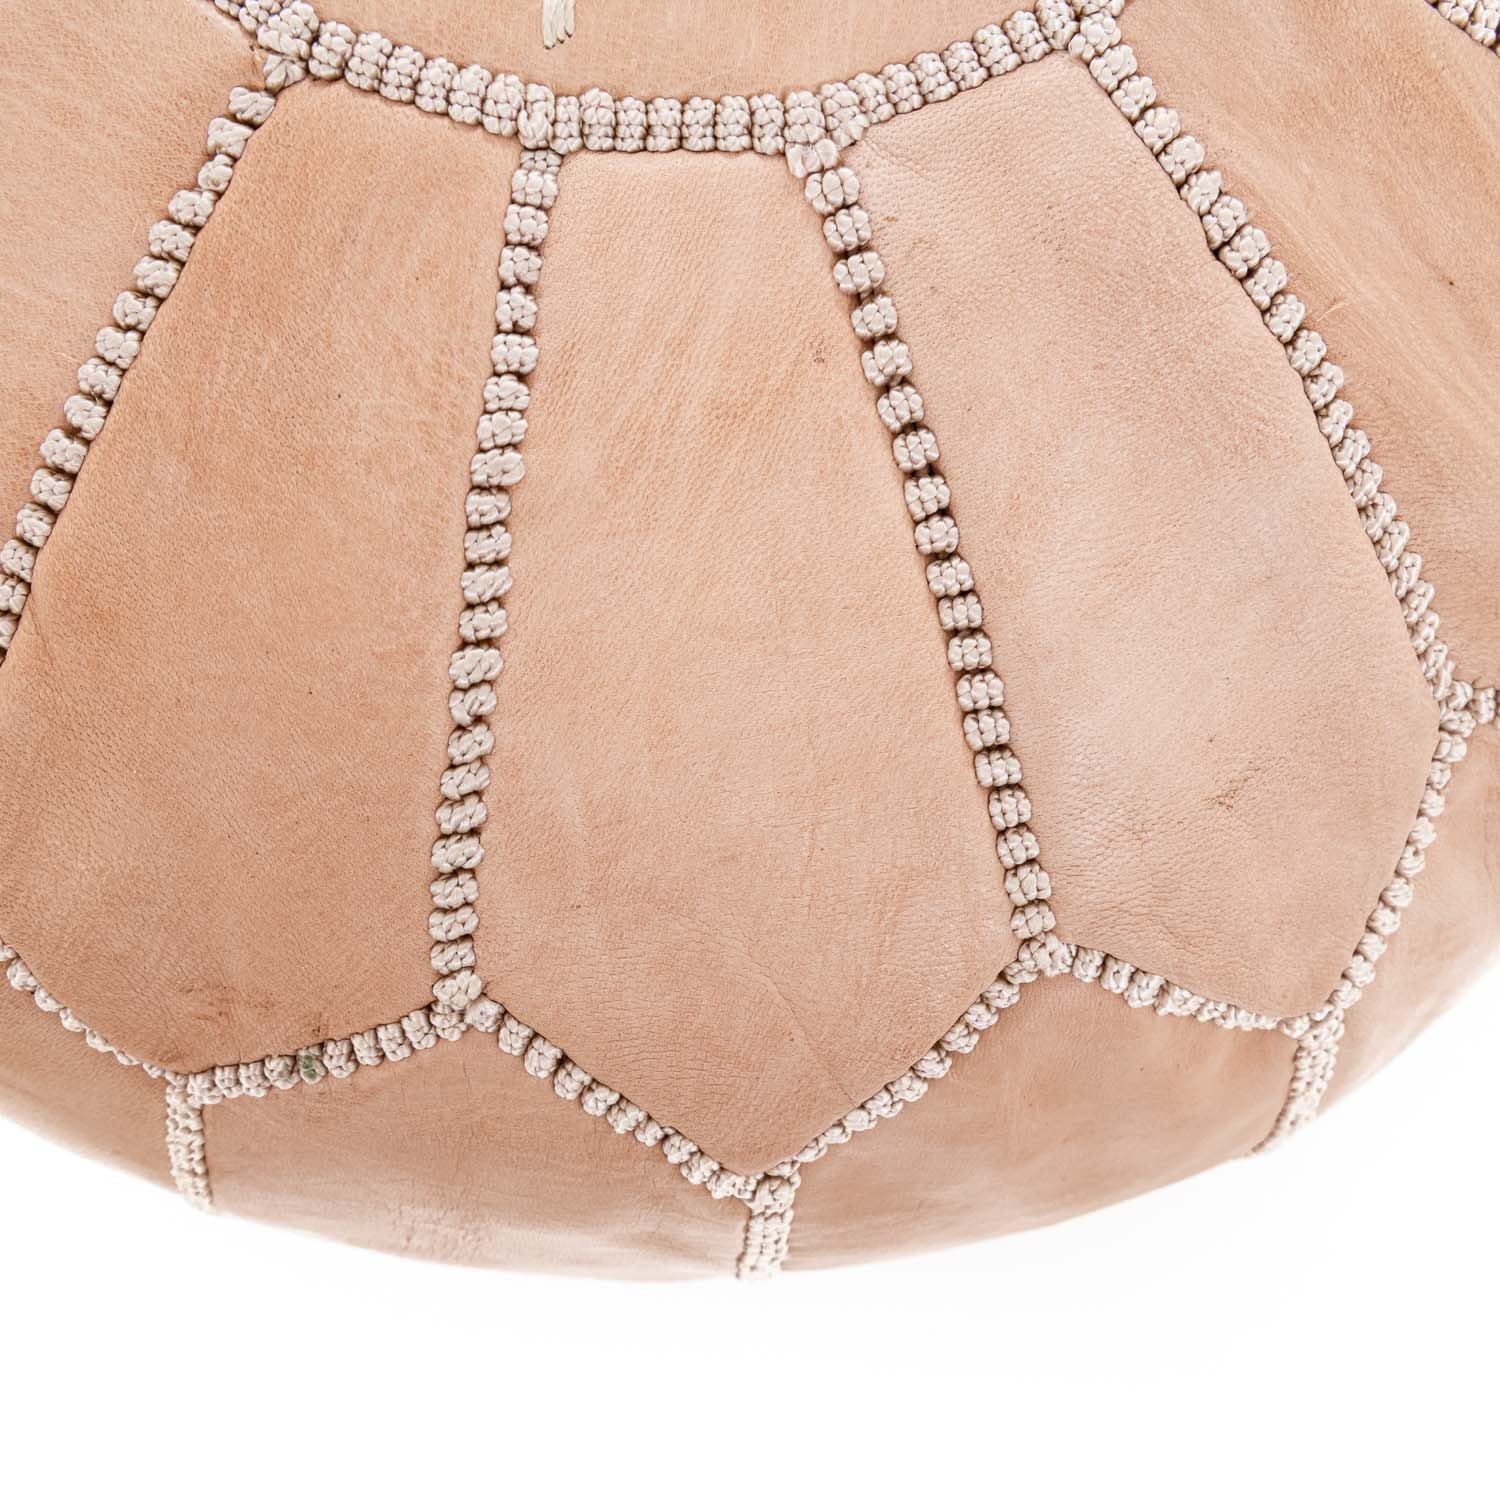 Authentic Moroccan Leather Pouf - Nude - Benisouk